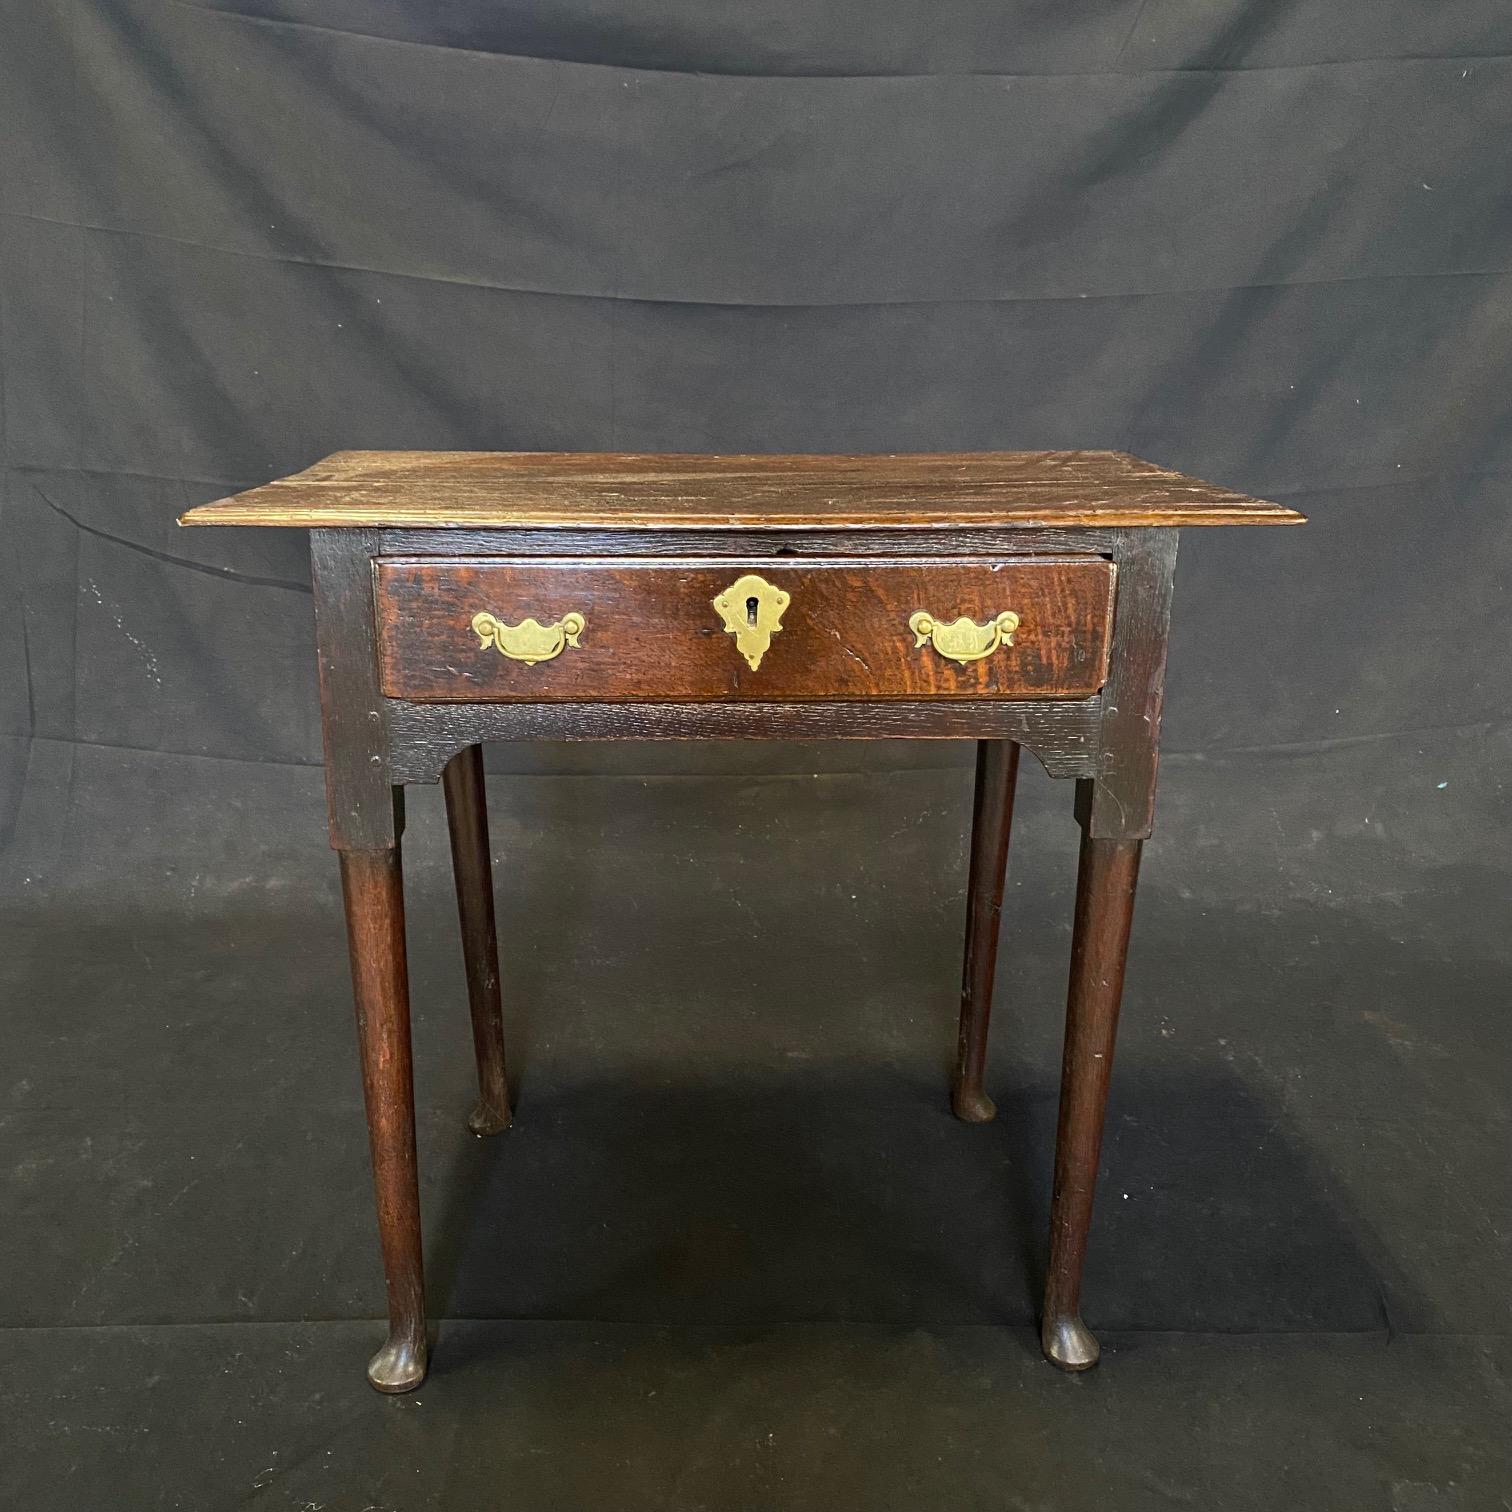 A super early British antique side, accent table or night stand. Lovely tiger oak with original brass hardware. Features one drawer with lock (no key), classic peg joinery and turned legs. Rich in character with a rustic feel. #2798
Apron 21.5 h.